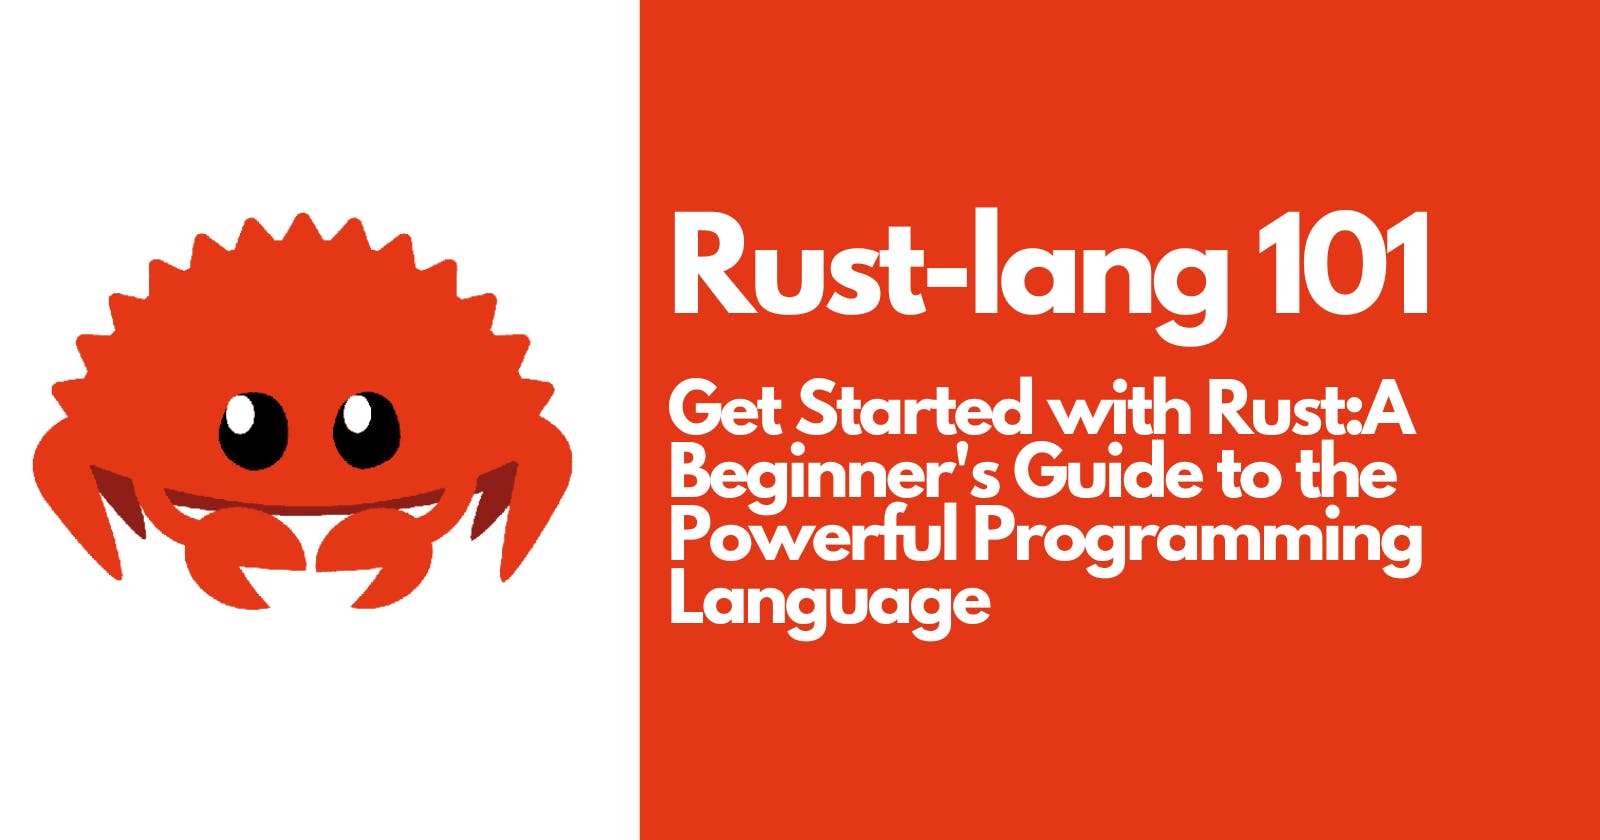 Get Started with Rust: A Beginner's Guide to the Powerful Programming Language